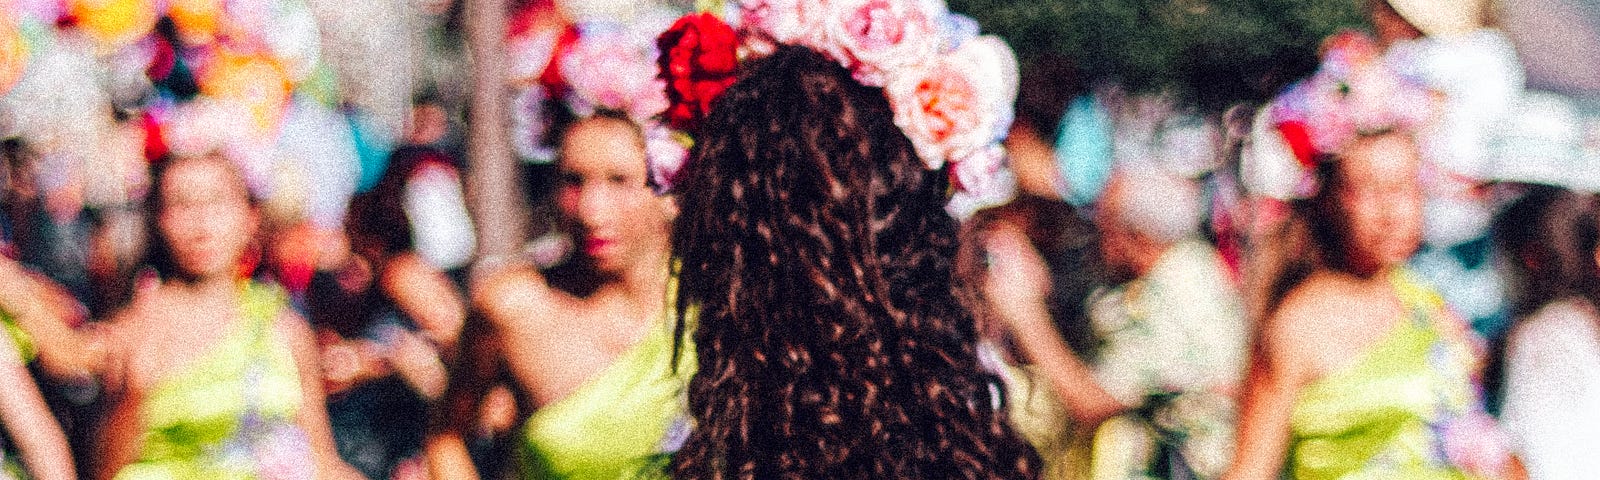 A woman in a lime green dress is in the foreground while several other women dressed the same are in the background. The woman in the foreground has curly black hair with a flower headdress.